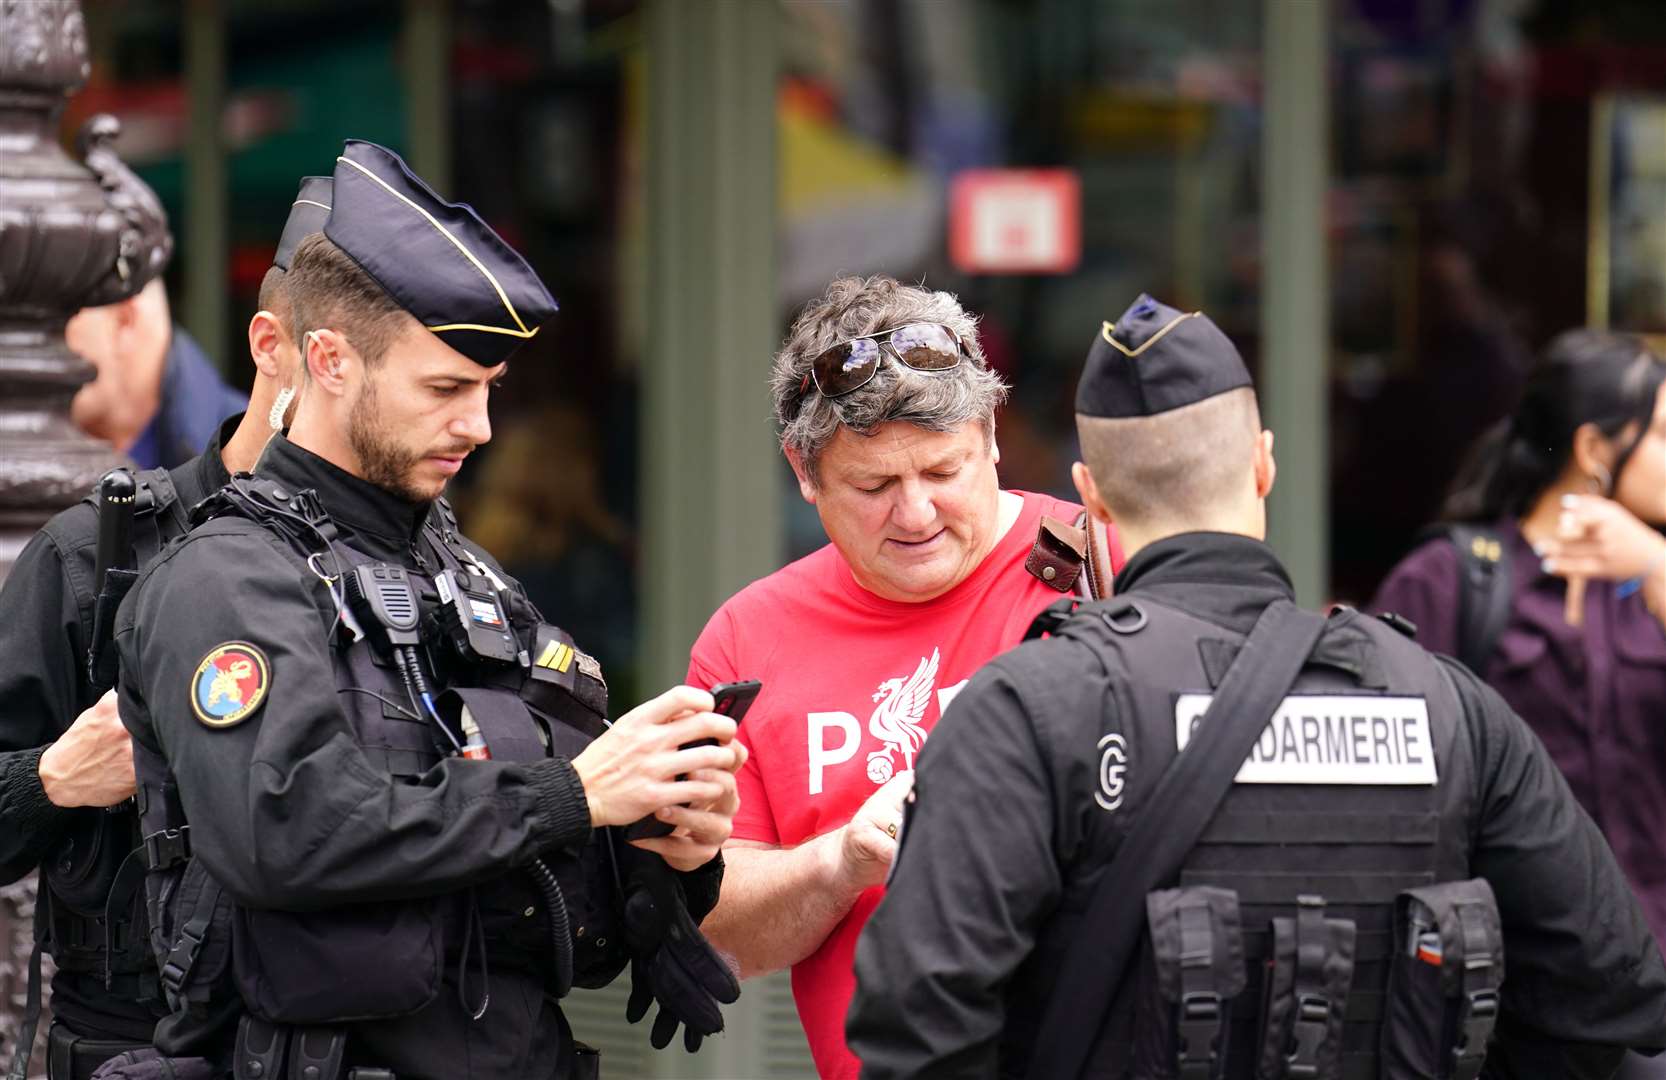 A Liverpool fan receives help from local police in Paris (Adam Davy/PA)